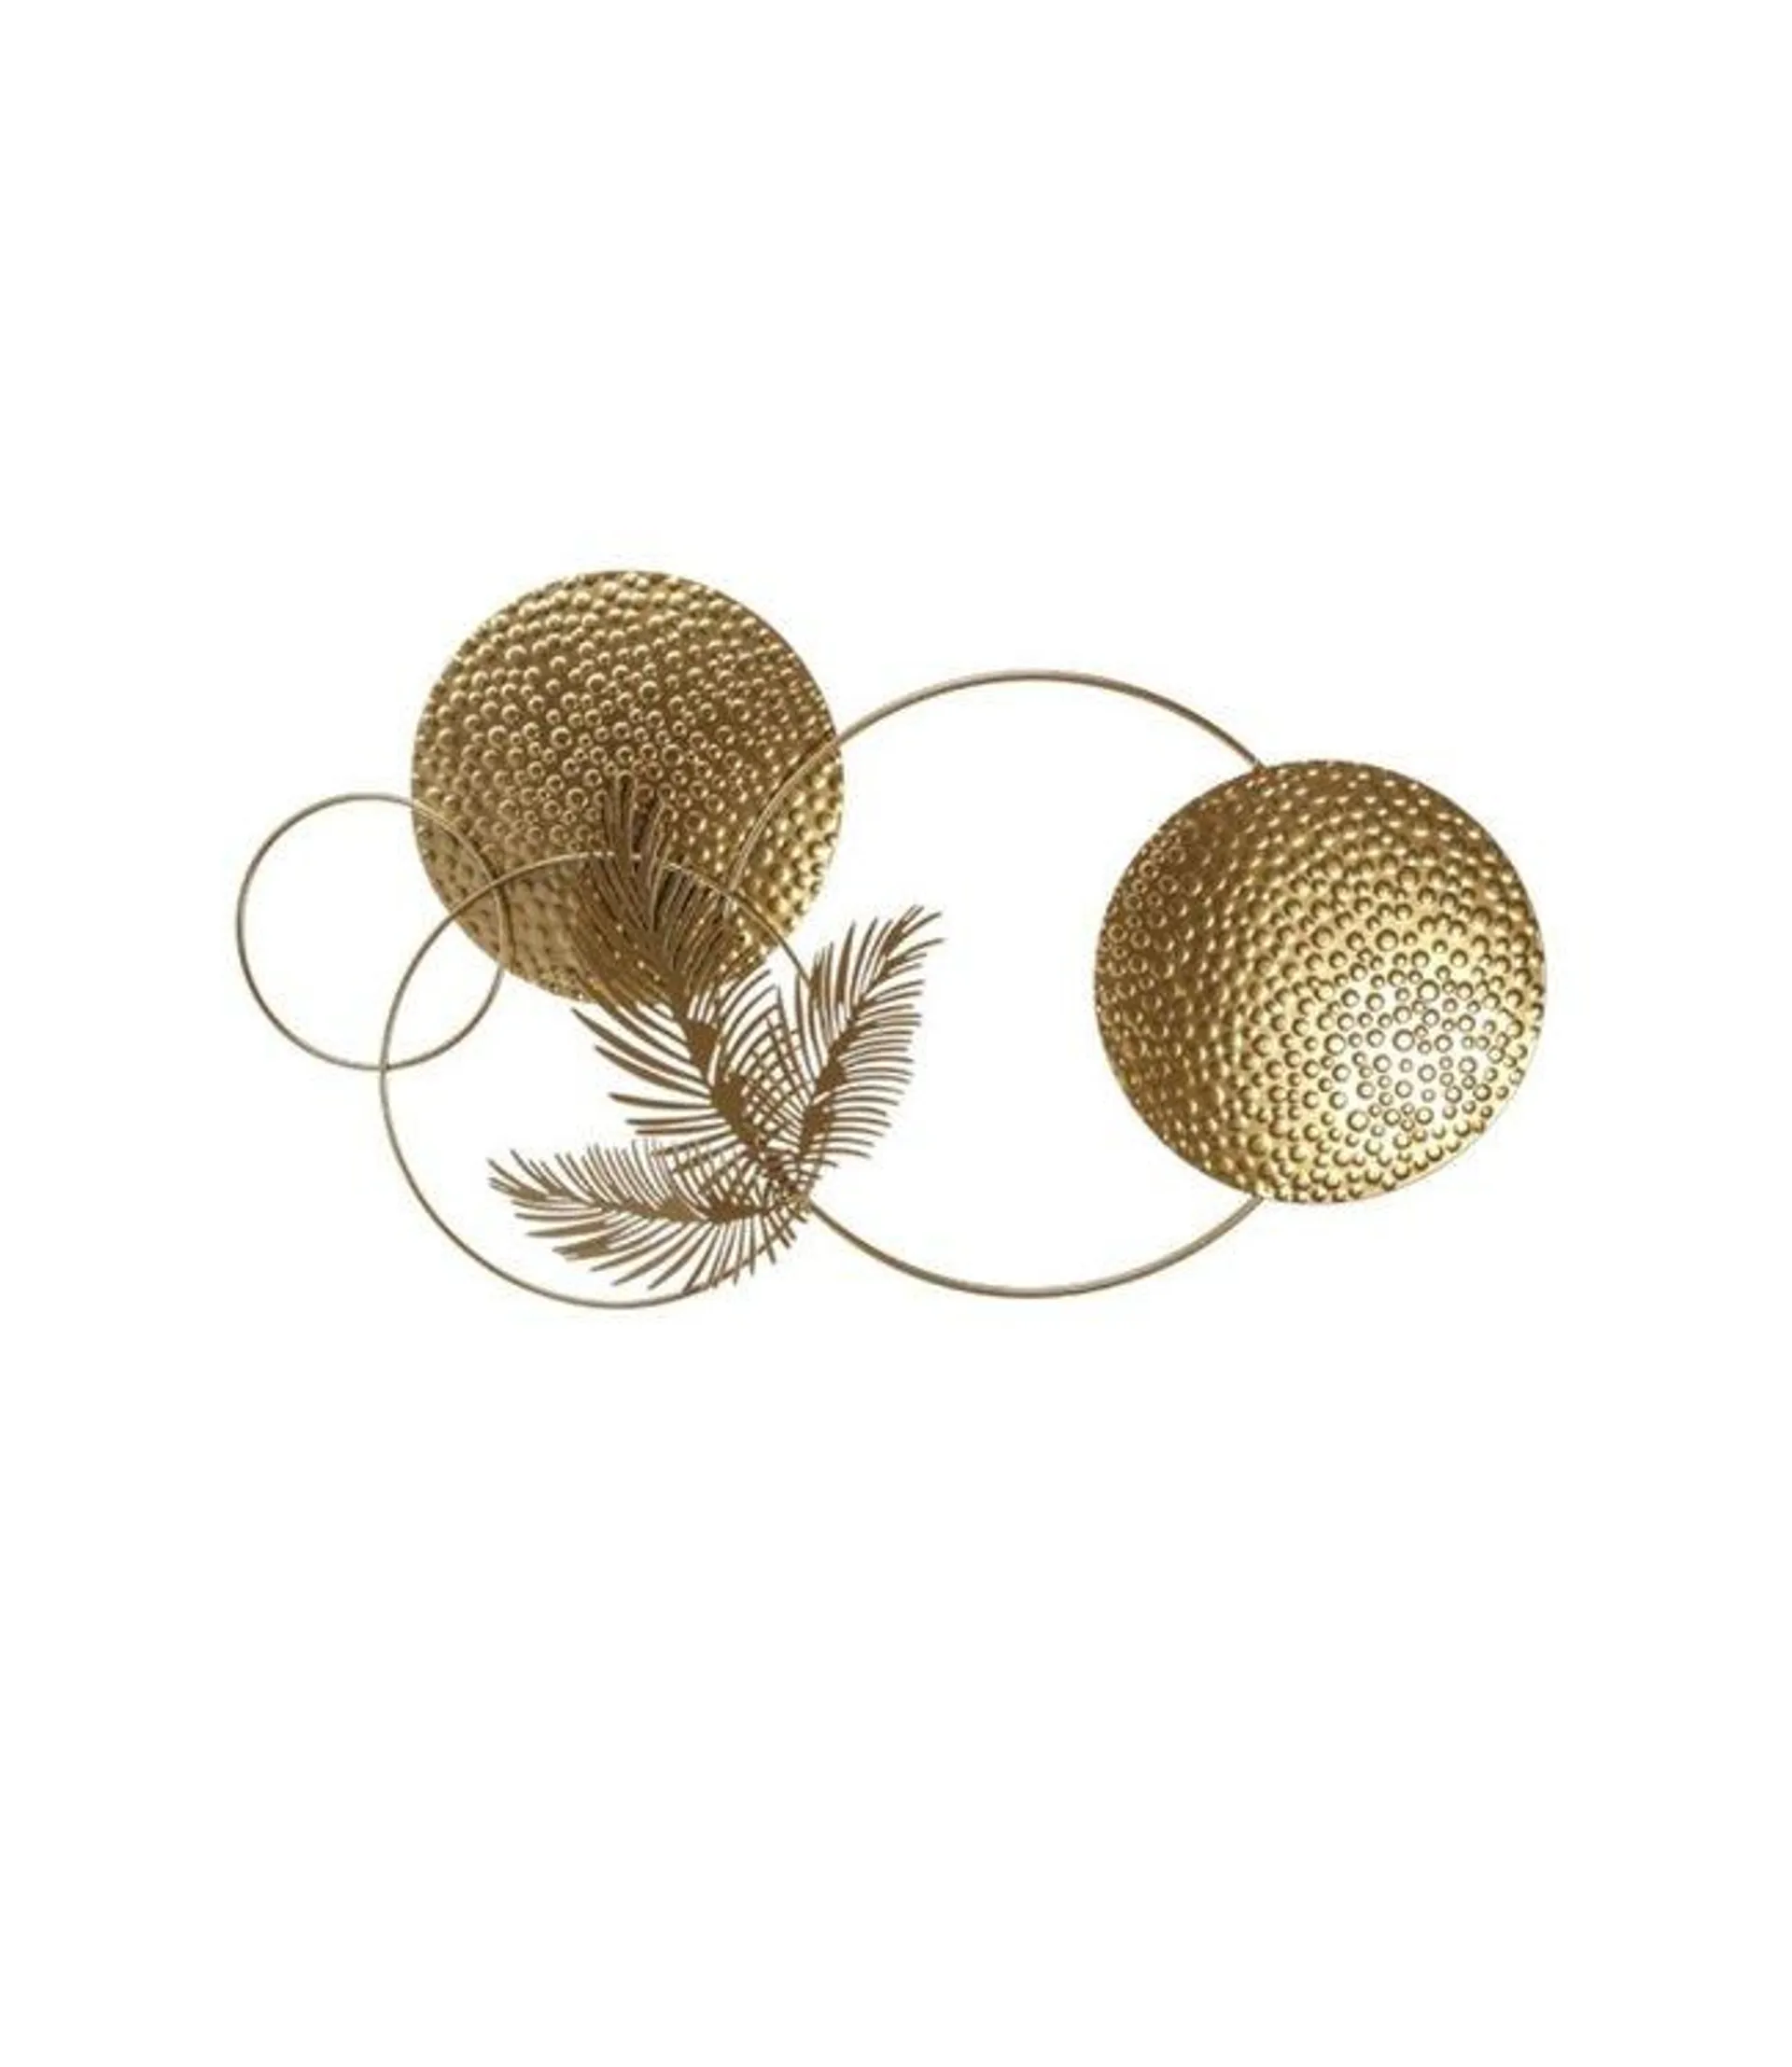 LAUREN TAYLOR METAL WALL ART LEAF AND CIRCLE GOLD 13.5x25.5"